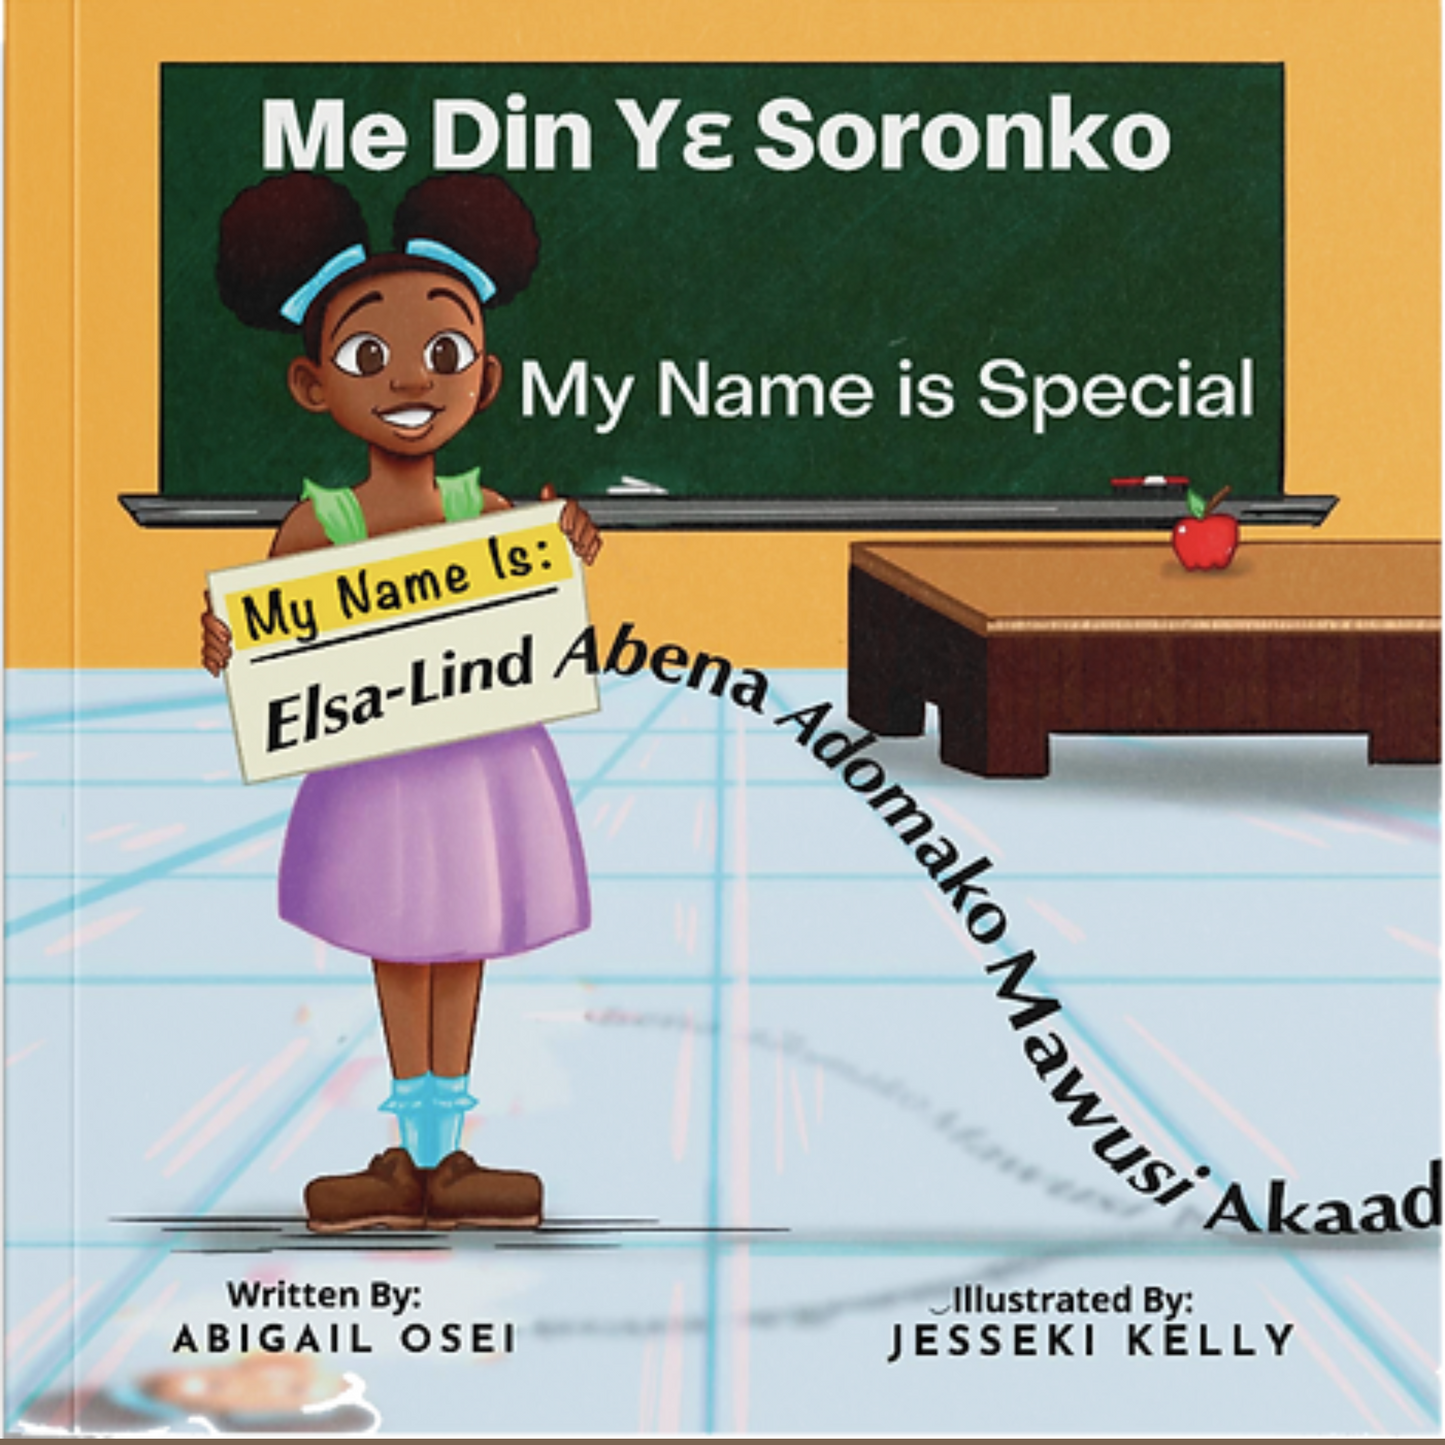 Me din yɛ soronko: My name is special